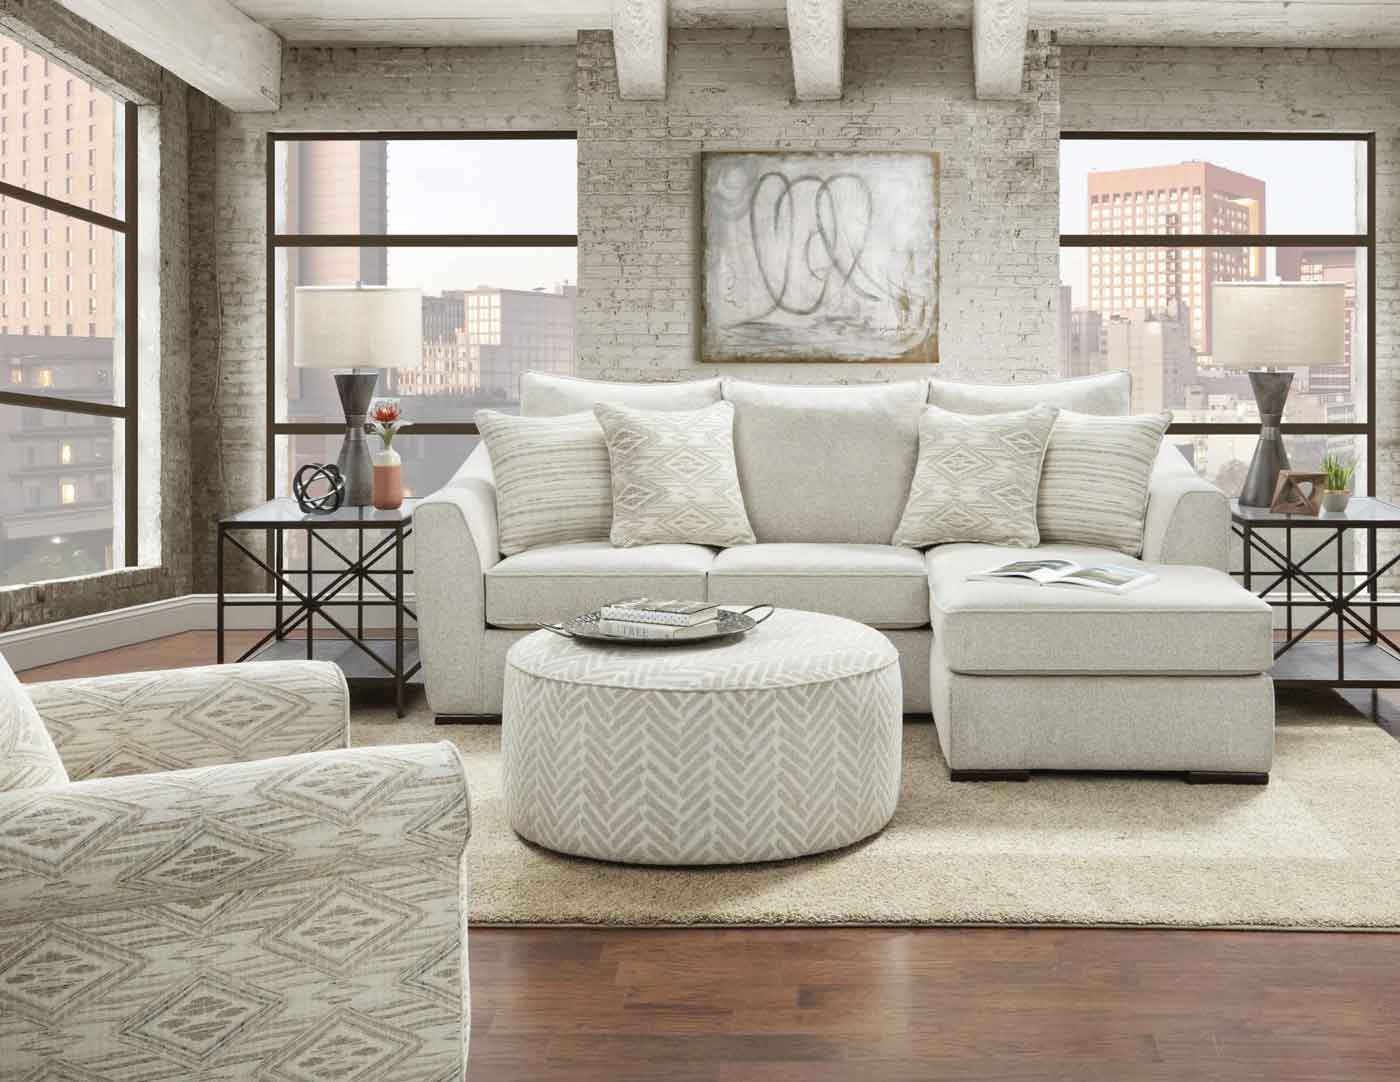 What You Need To Know About Fusion Furniture